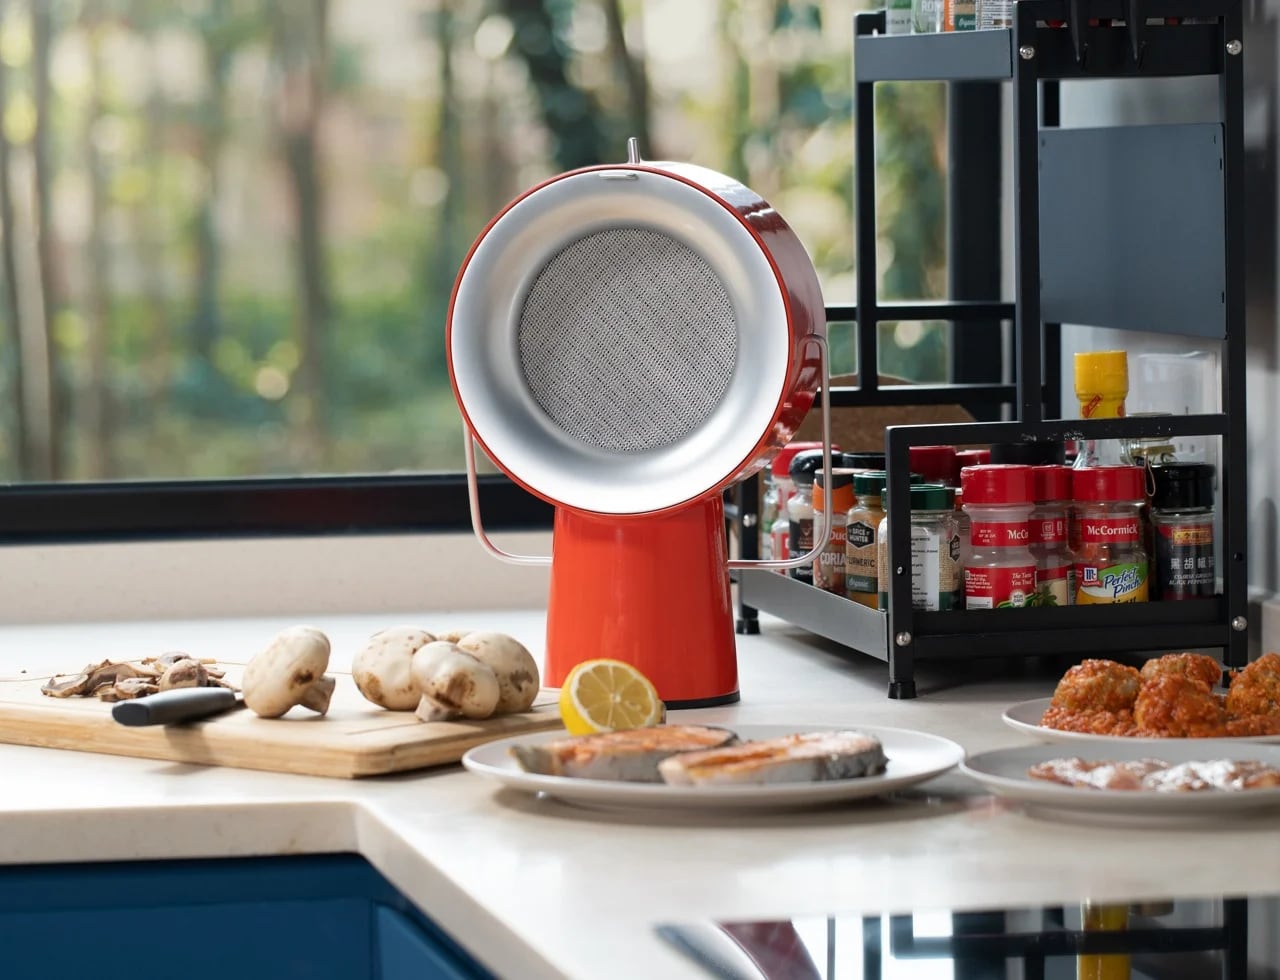 https://www.yankodesign.com/images/design_news/2022/06/airhood-portable-range-hood-promises-worry-free-cooking-by-keeping-oils-and-smells-away/portable_range_hood_removes_smoke_oil_from_forming_02.jpg